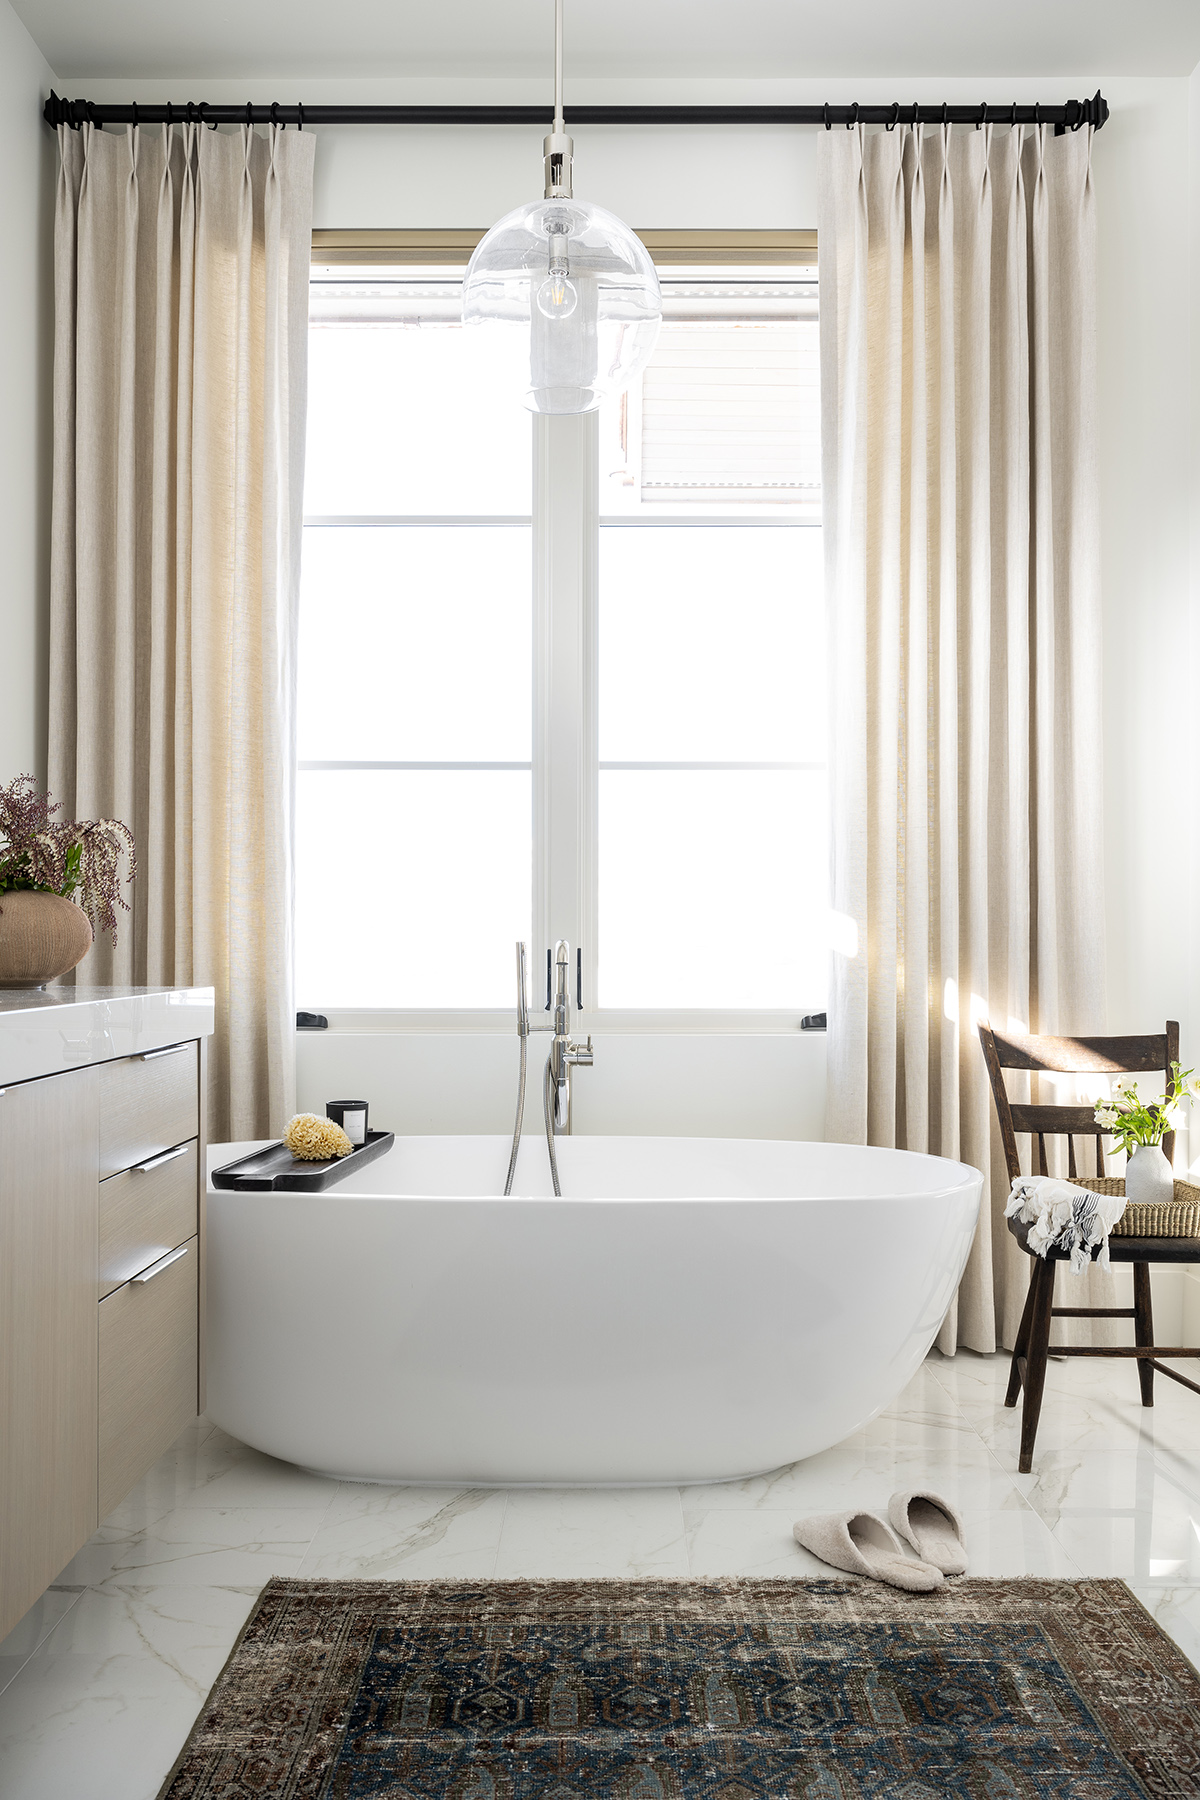 standing bathtub in front of large window